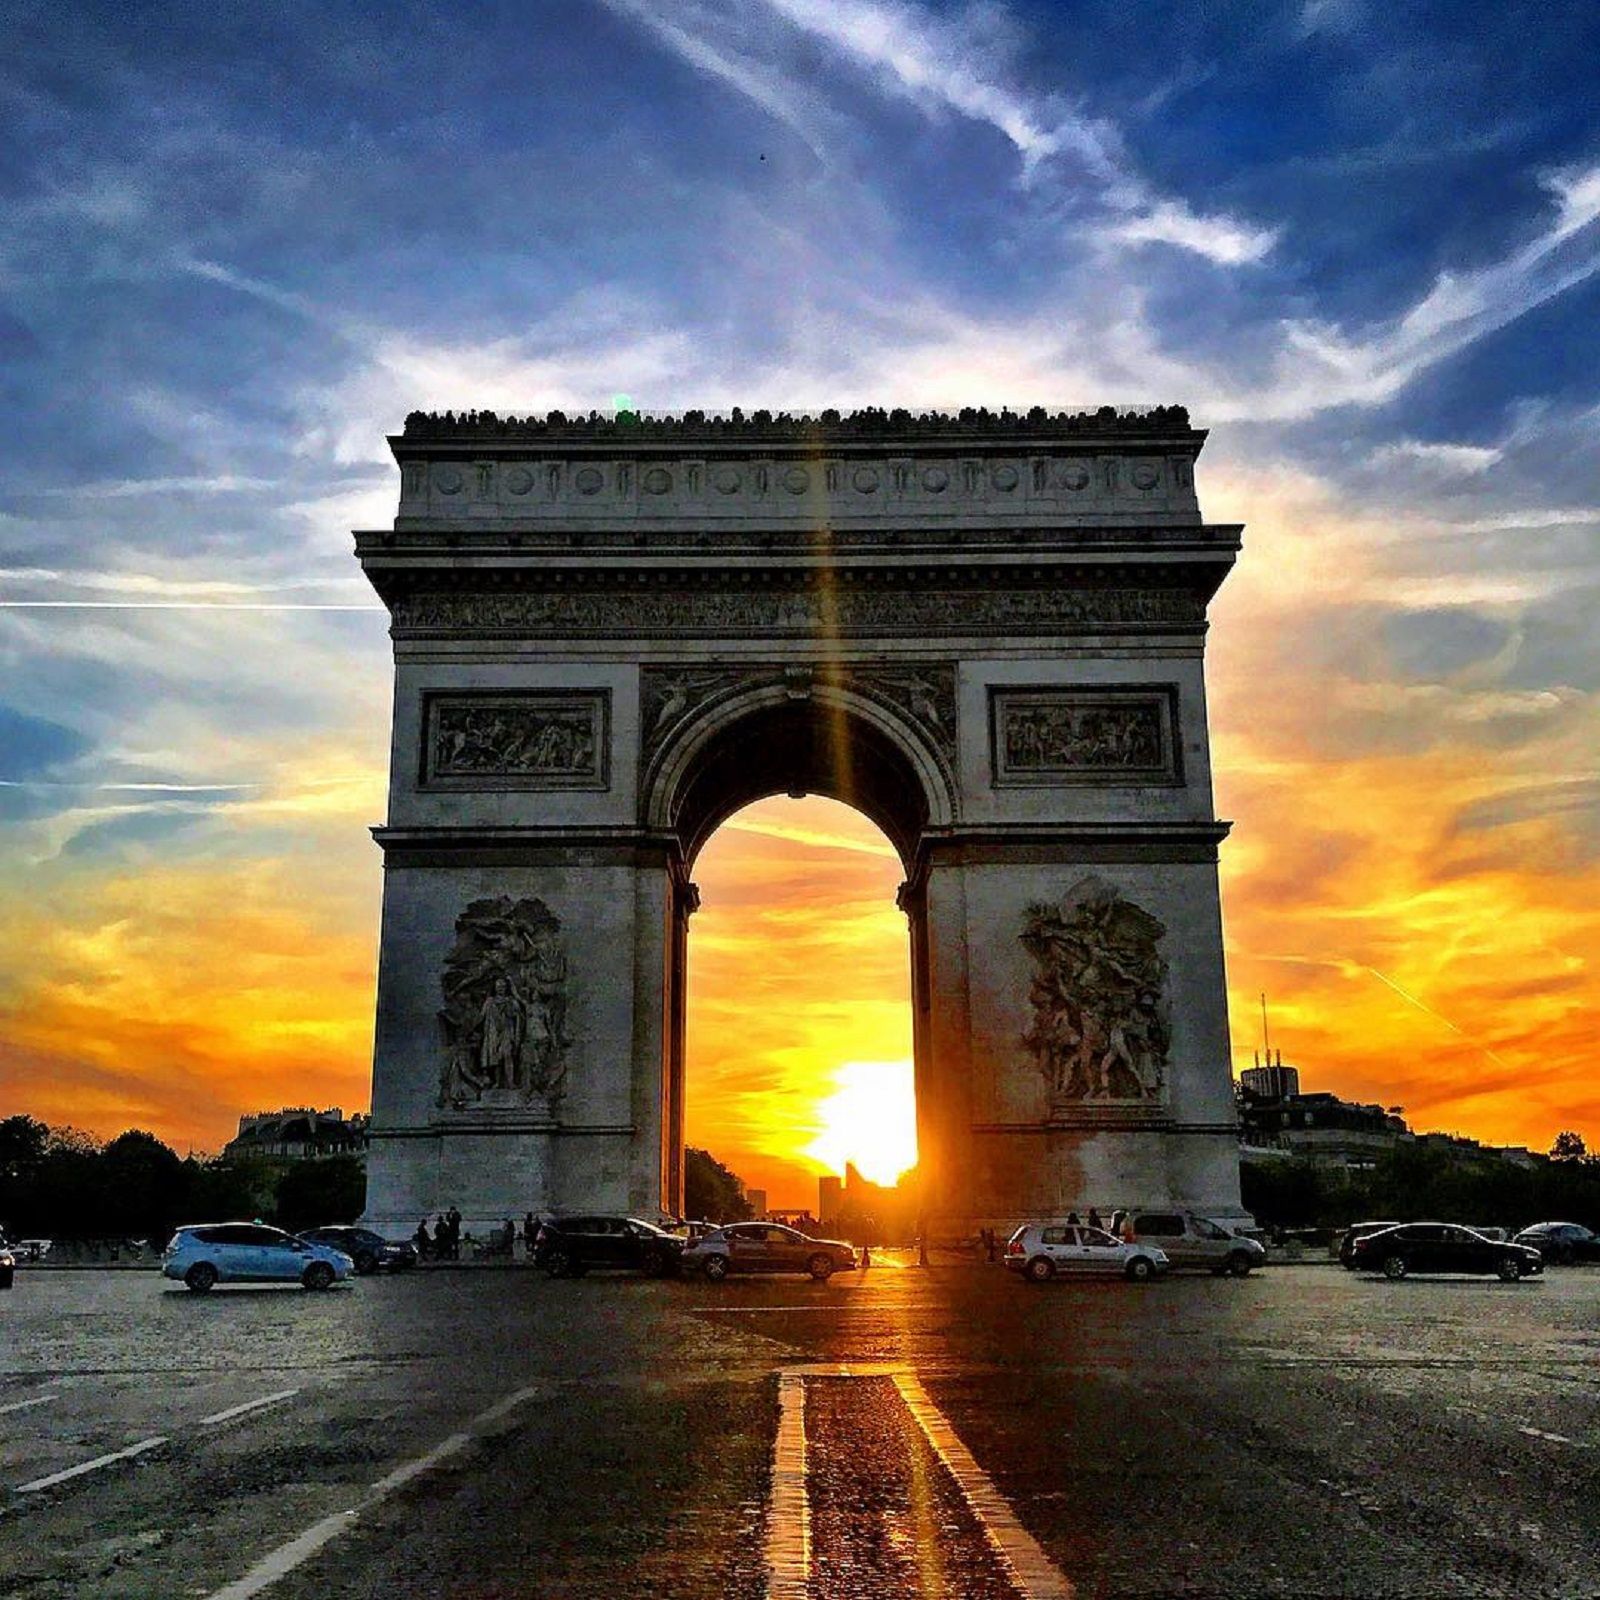 30 most instagrammed landmarks from around the world image 23